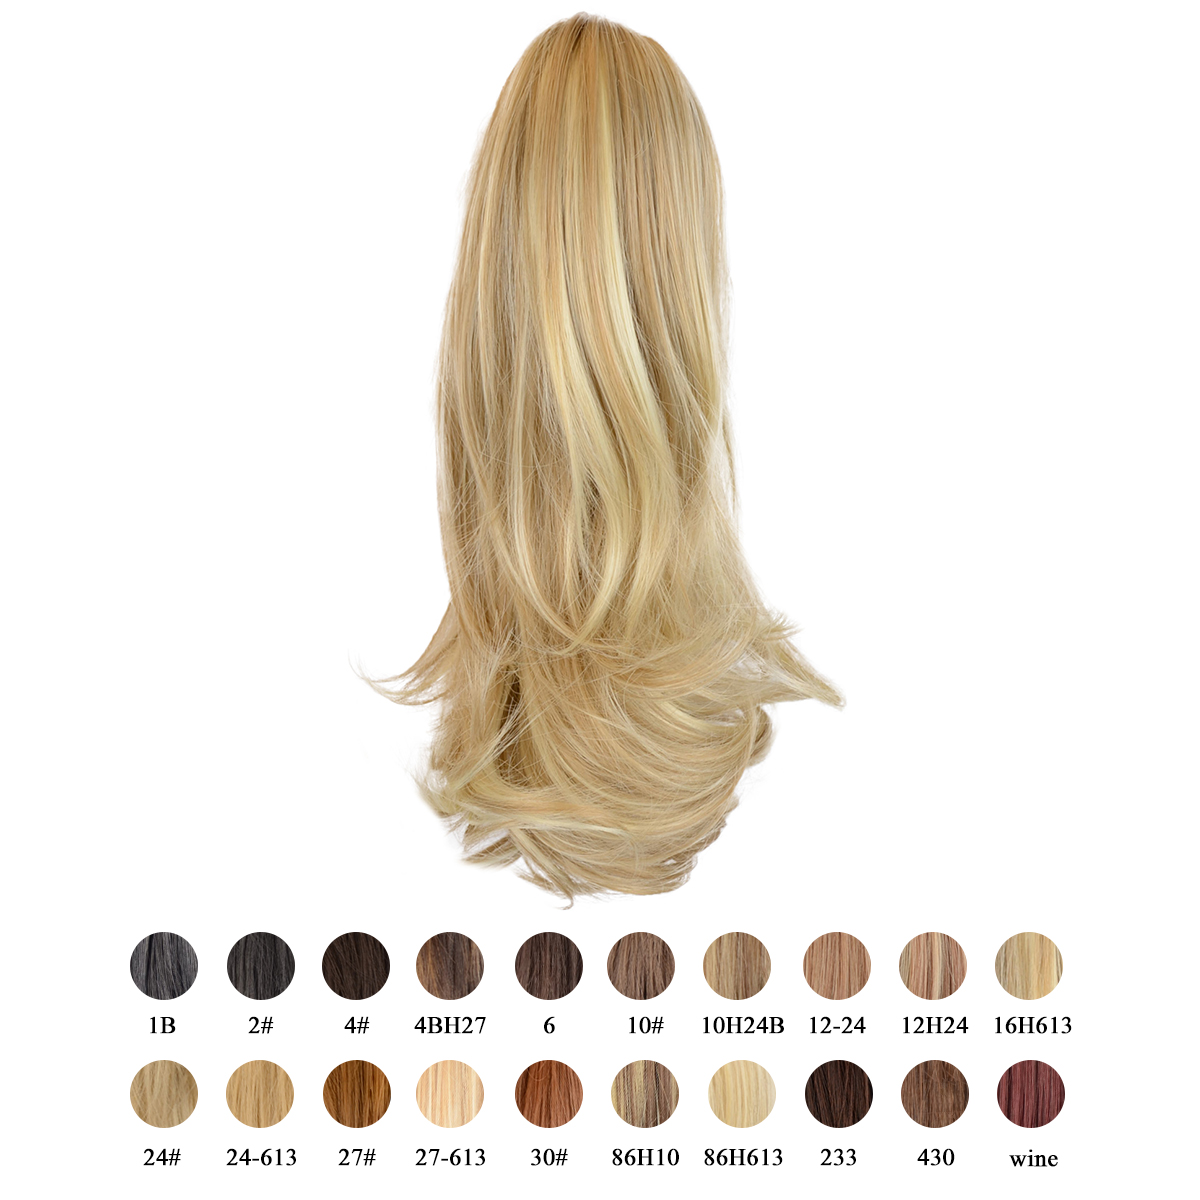 Light Ash Brown Mix Sofeiyan 13 Ponytail Extension Long Curly Ponytail Clip in Claw Hair Extension Natural Looking Synthetic Hairpiece for Women,Medium Brown